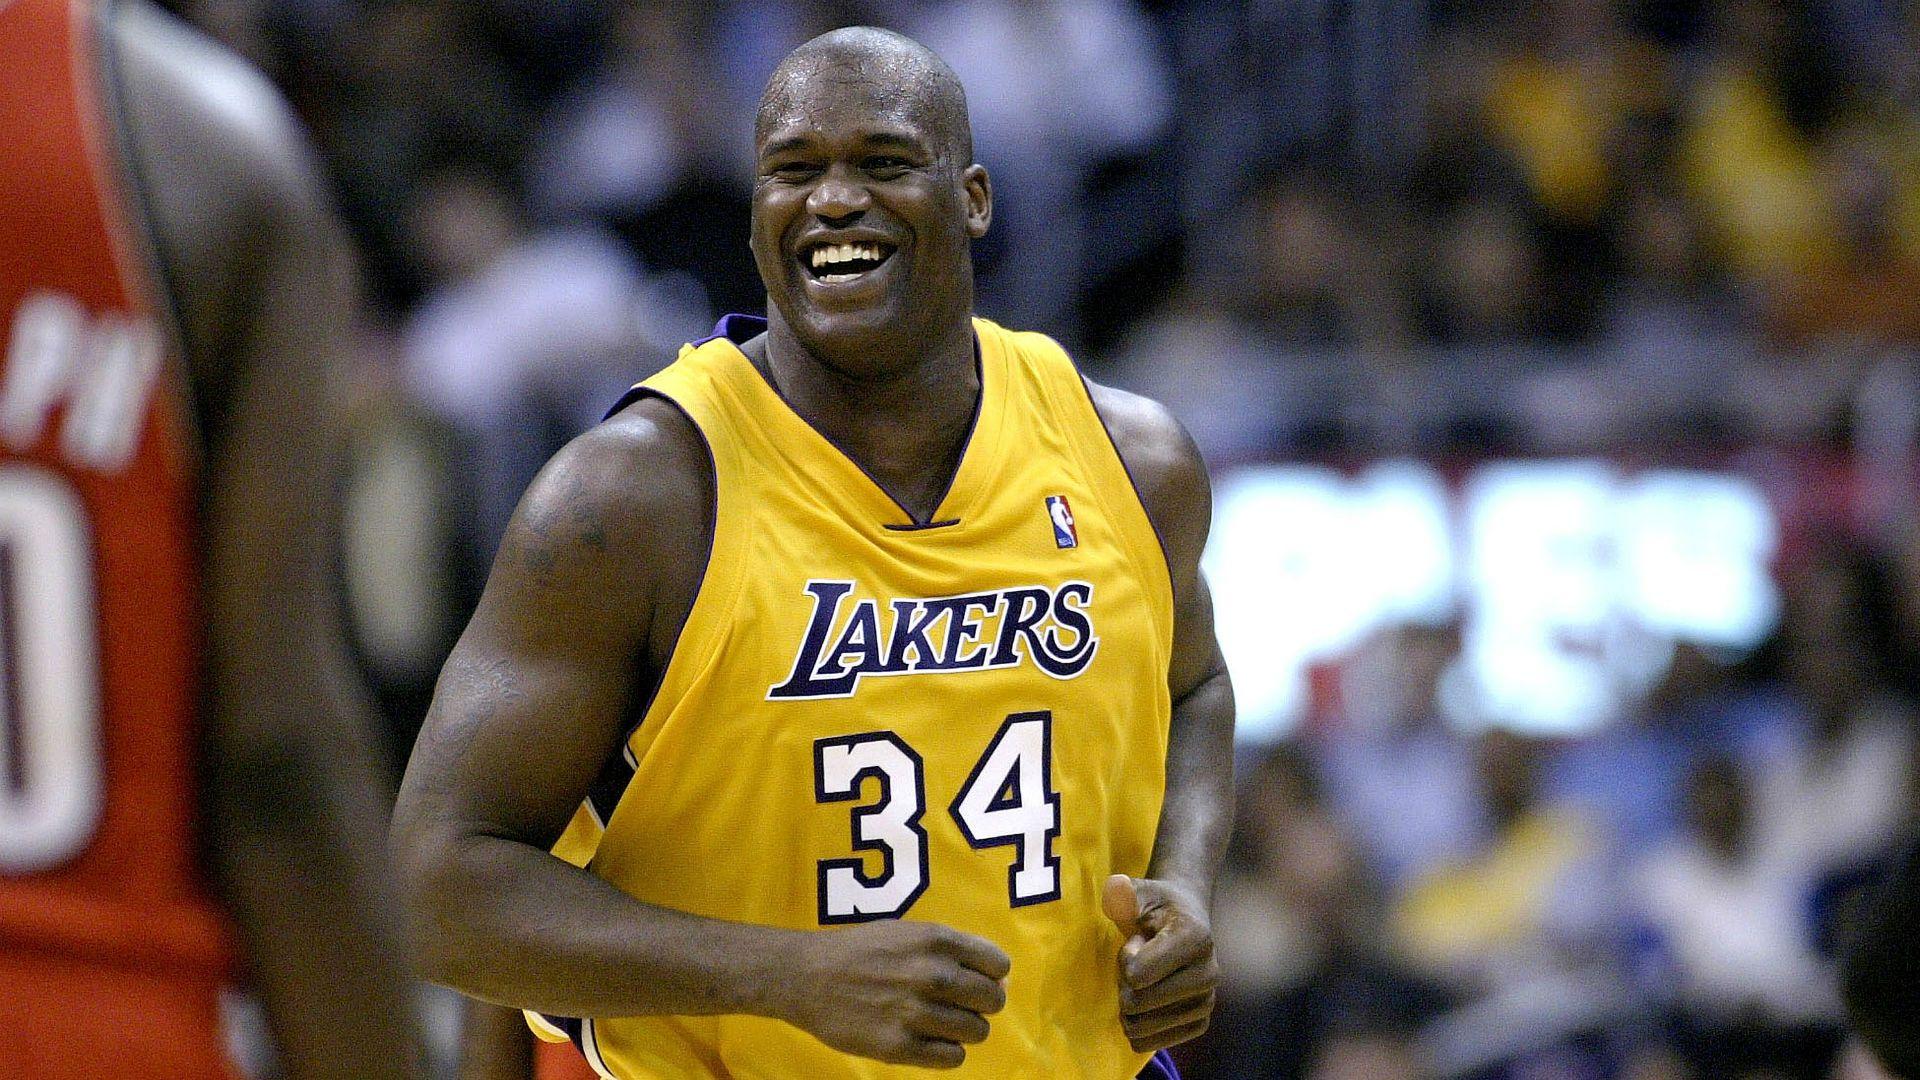 Shaquille O'Neal's son says his dad would be even more dominant if